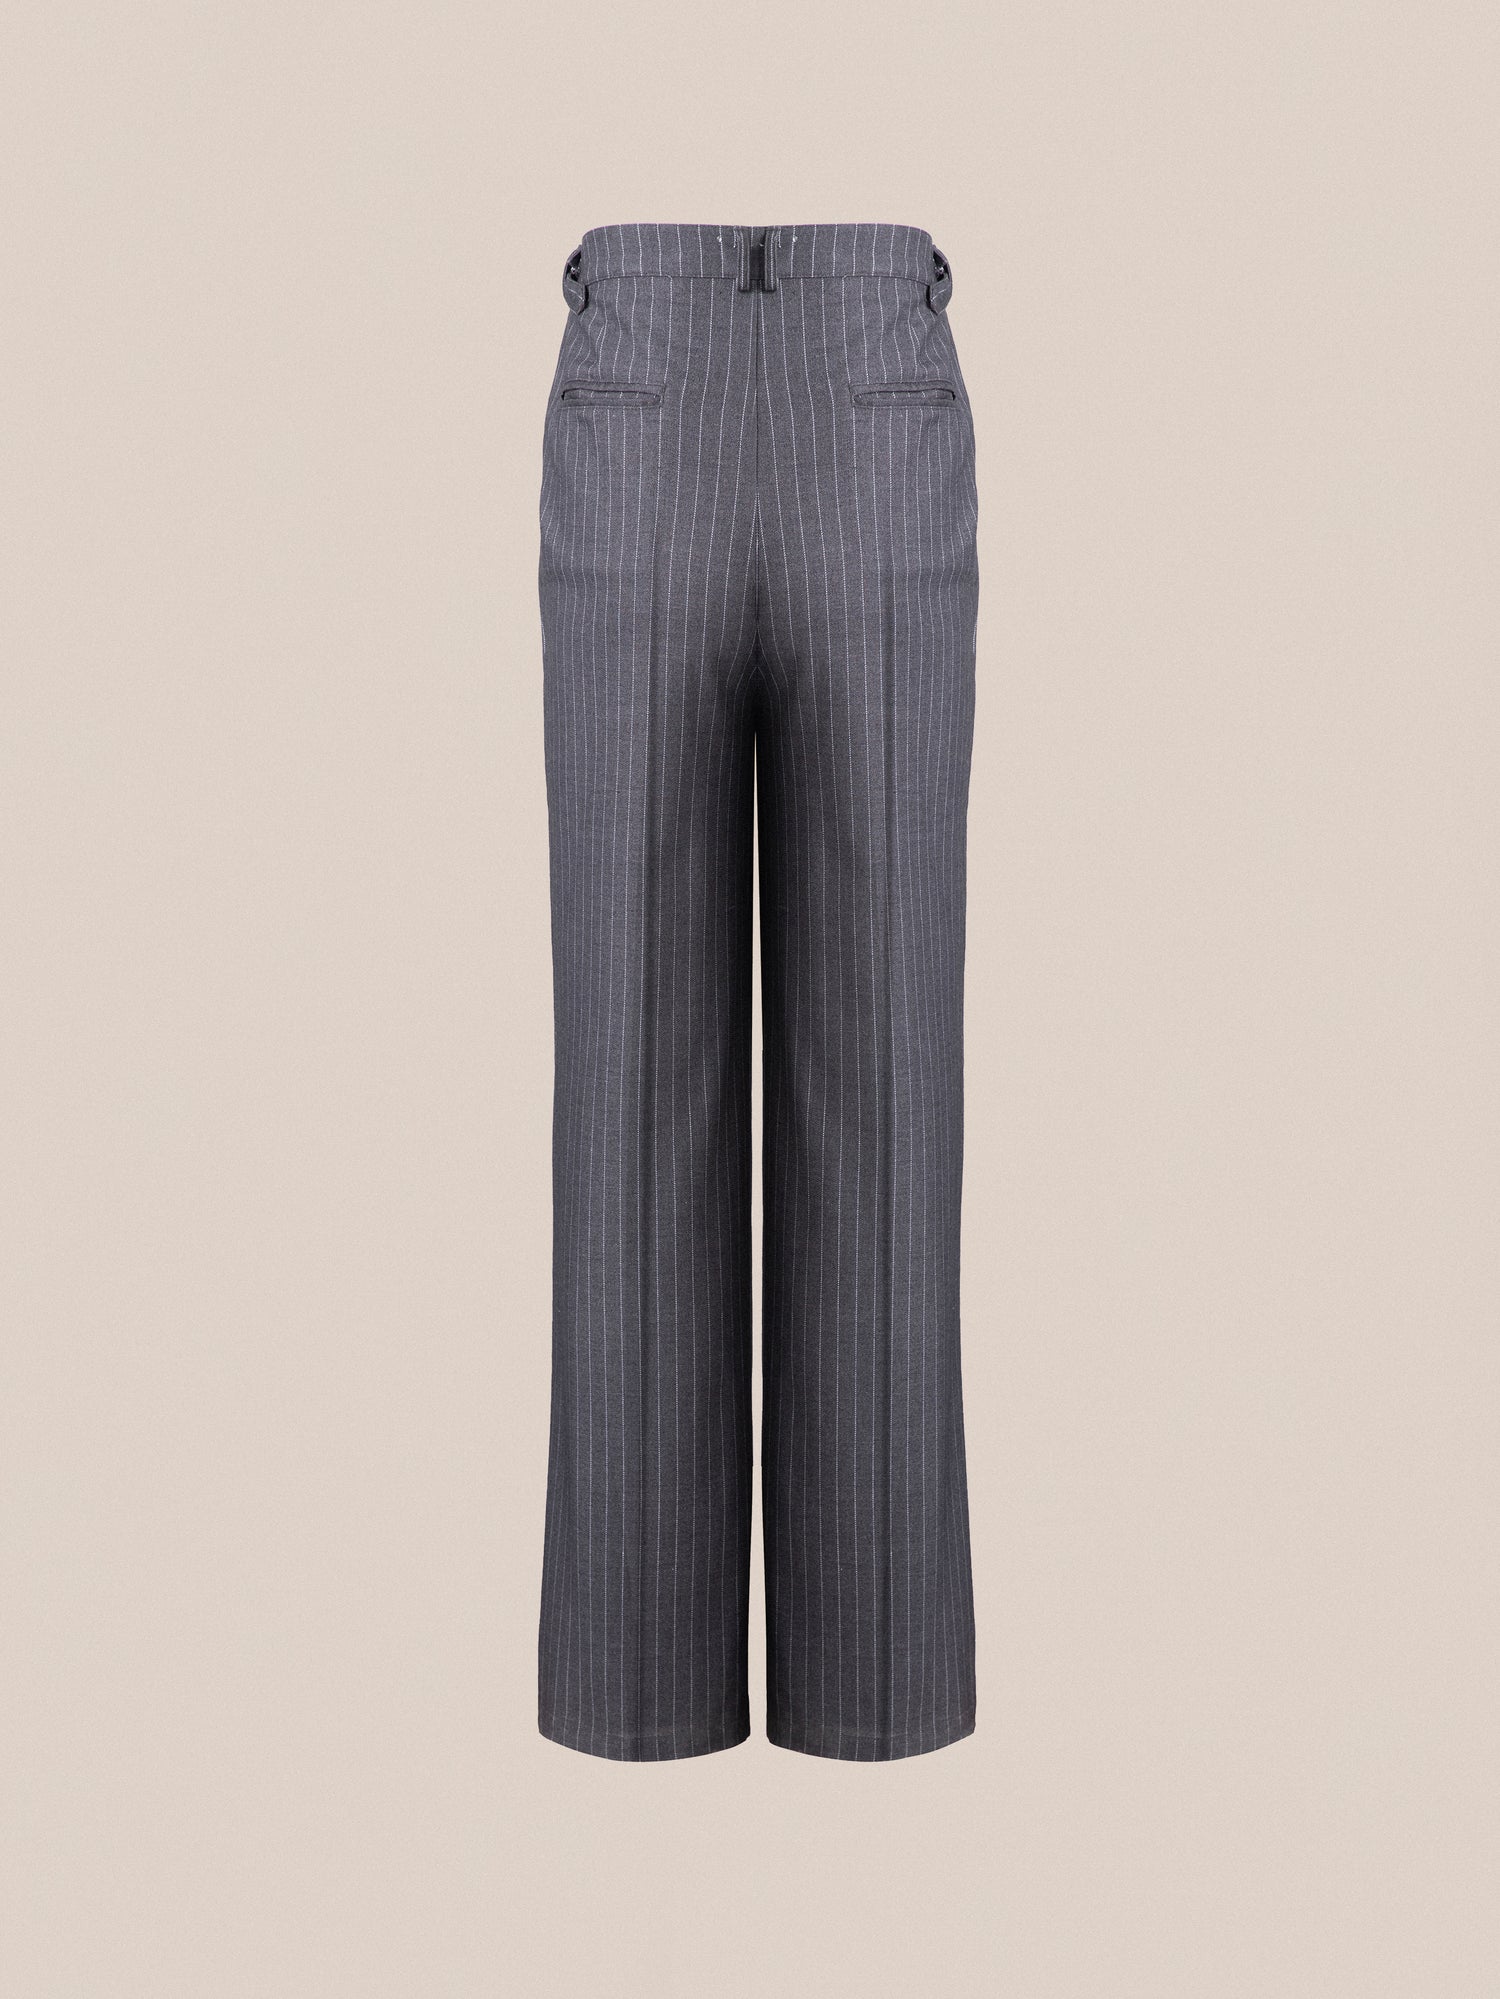 A pair of Found Pinstripe Pleated Trousers on a beige background.